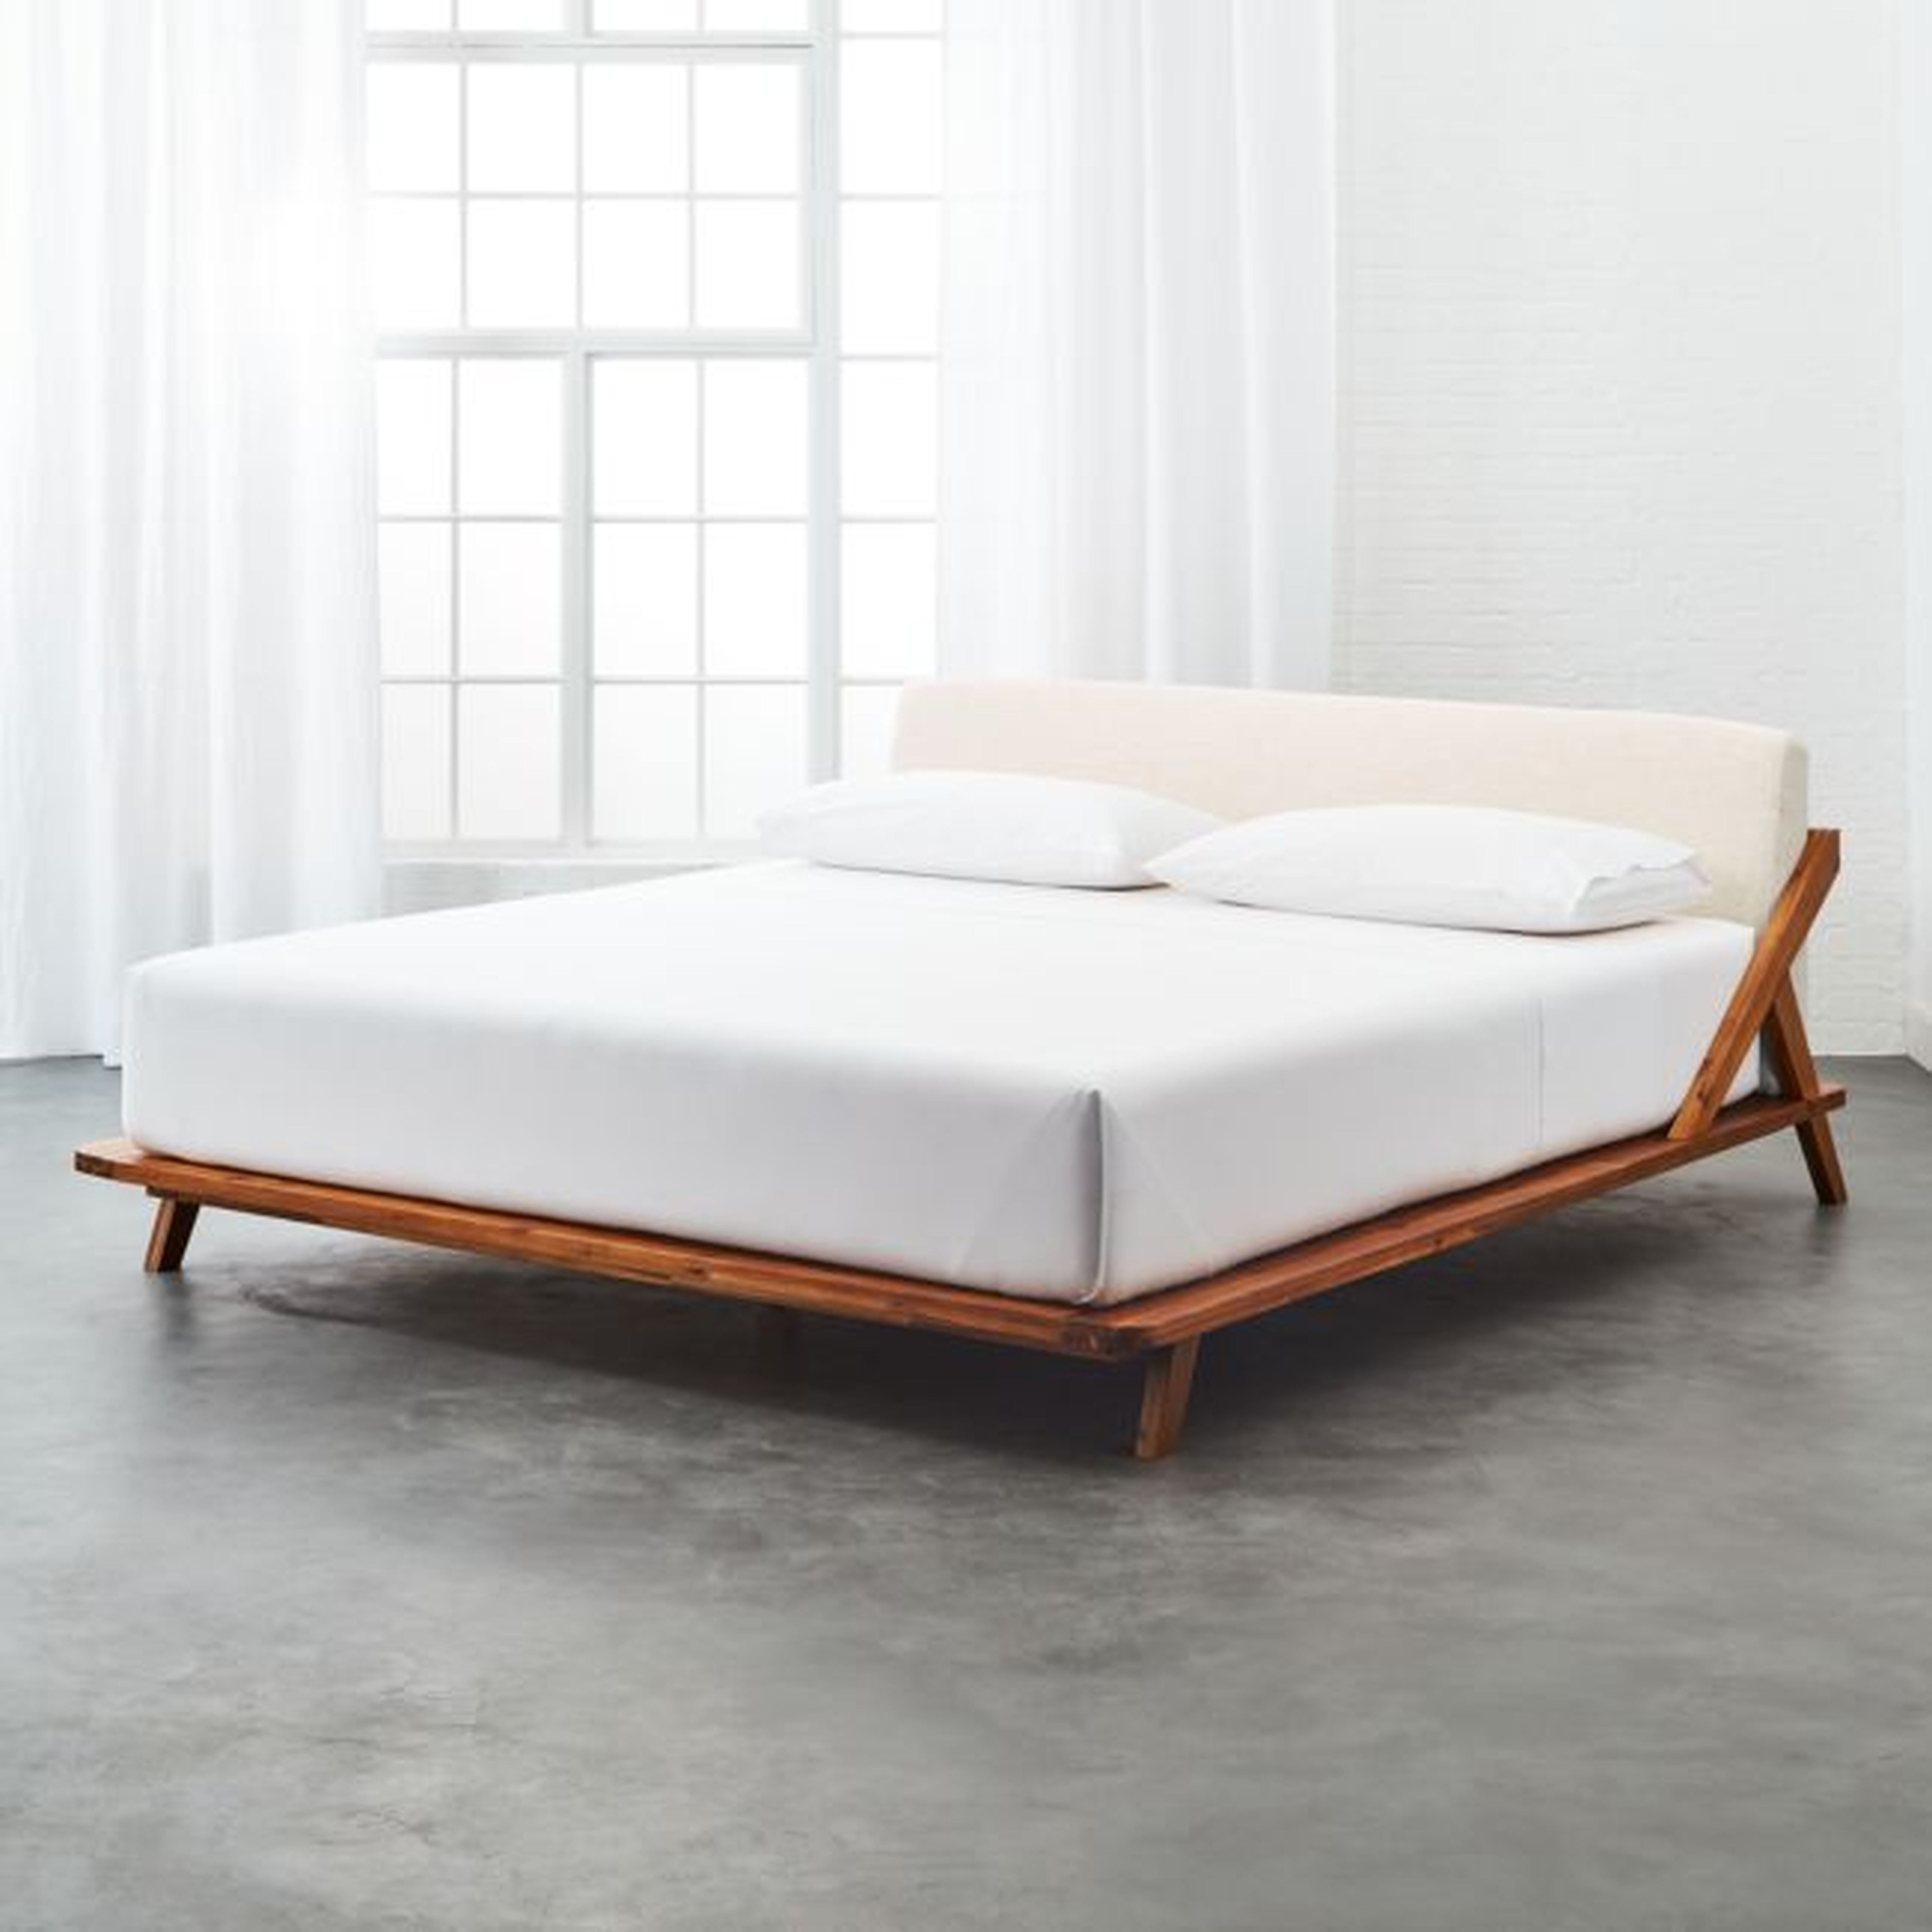 Drommen Acacia Wood King Bed - CB2